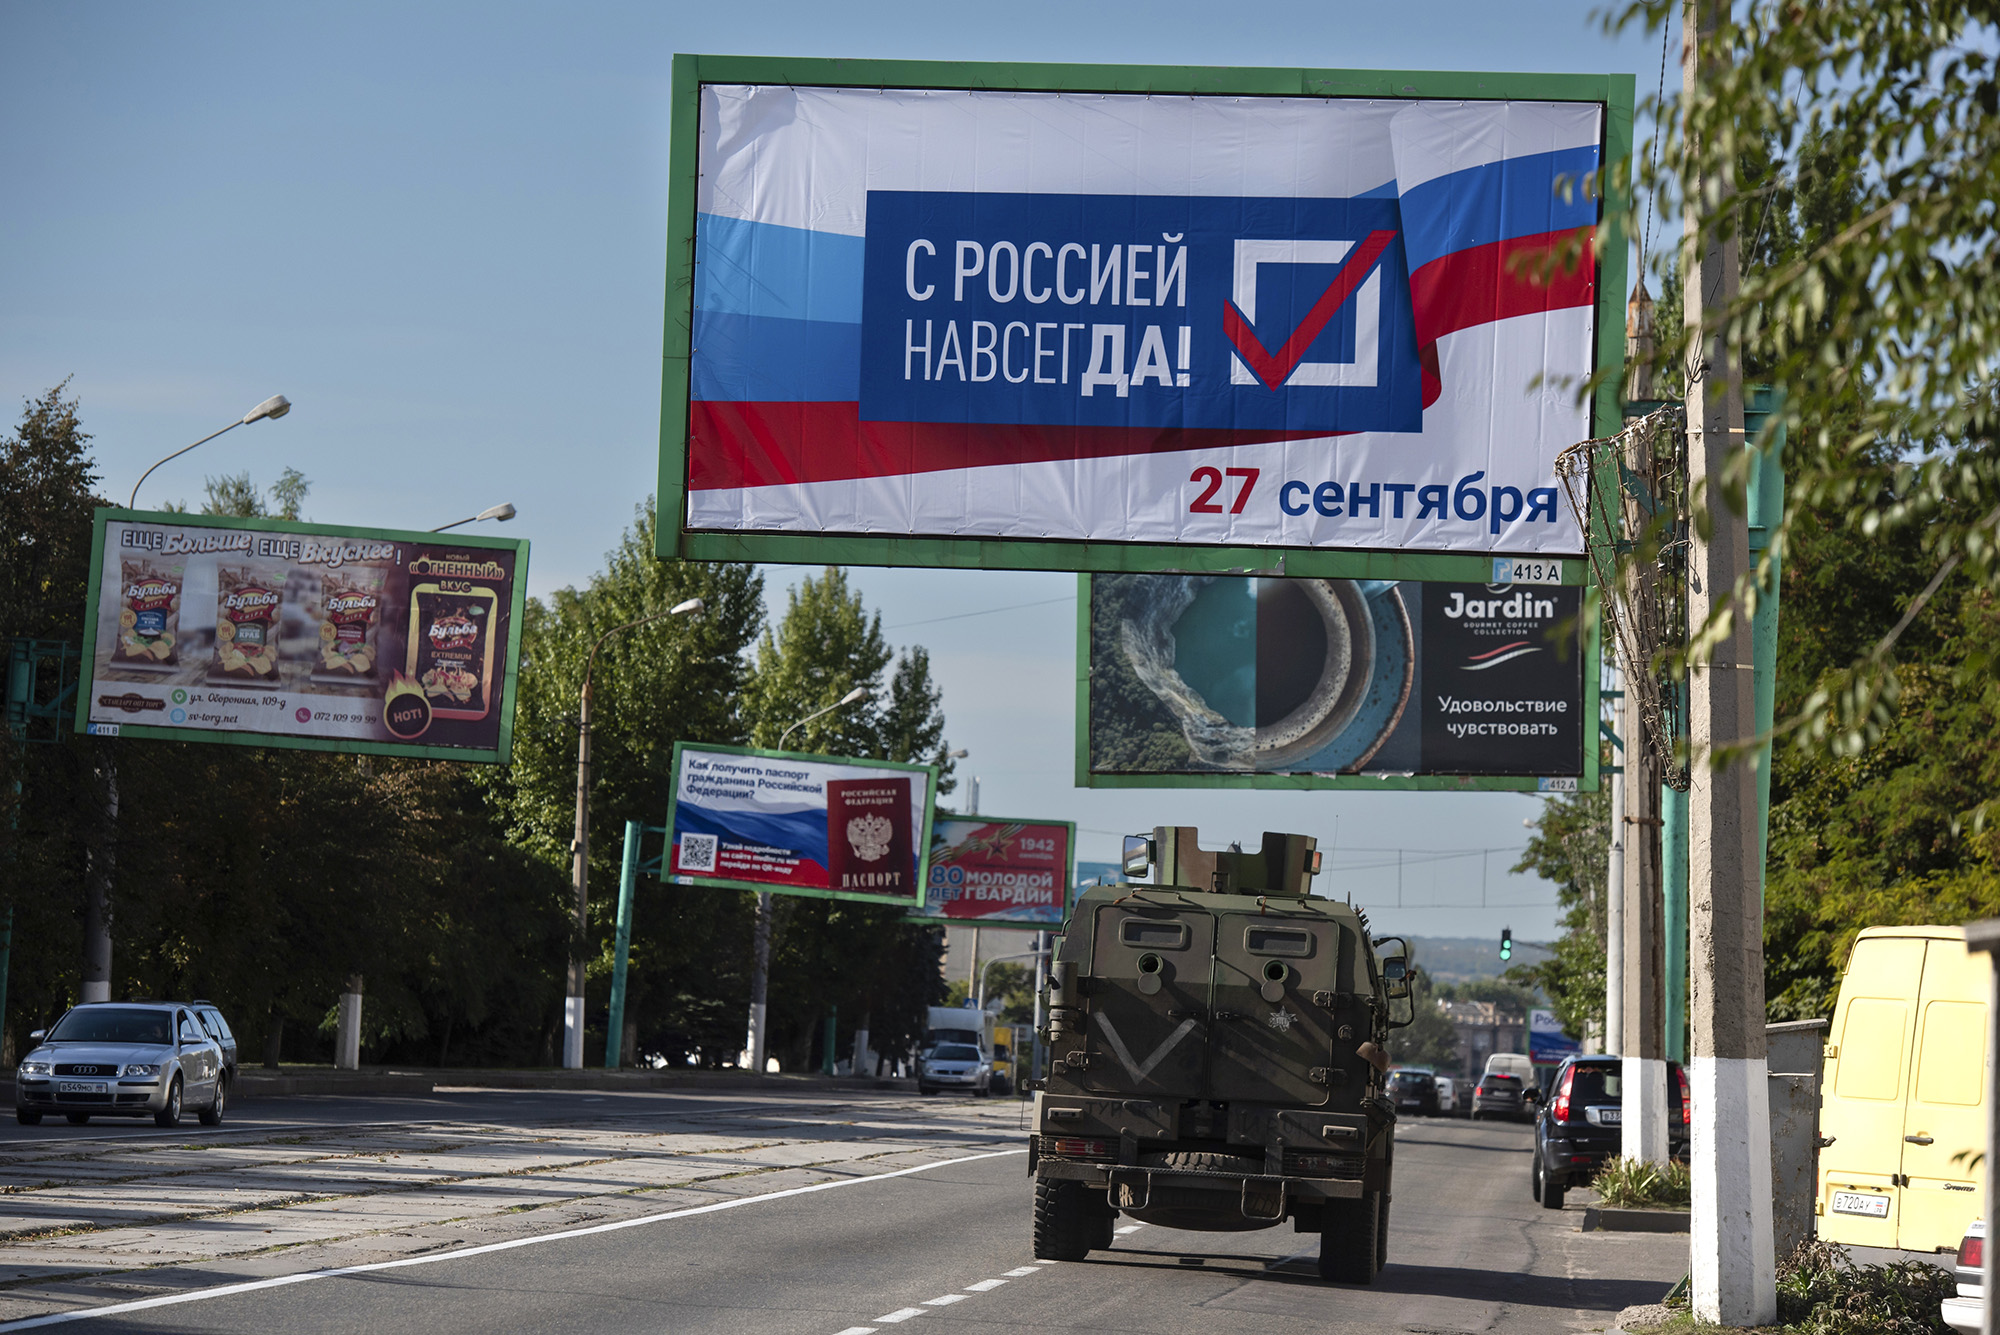 A military vehicle drives down a street with a billboard reading "With Russia Forever, September 27" ahead of a referendum in Luhansk, eastern Ukraine, on September 22.